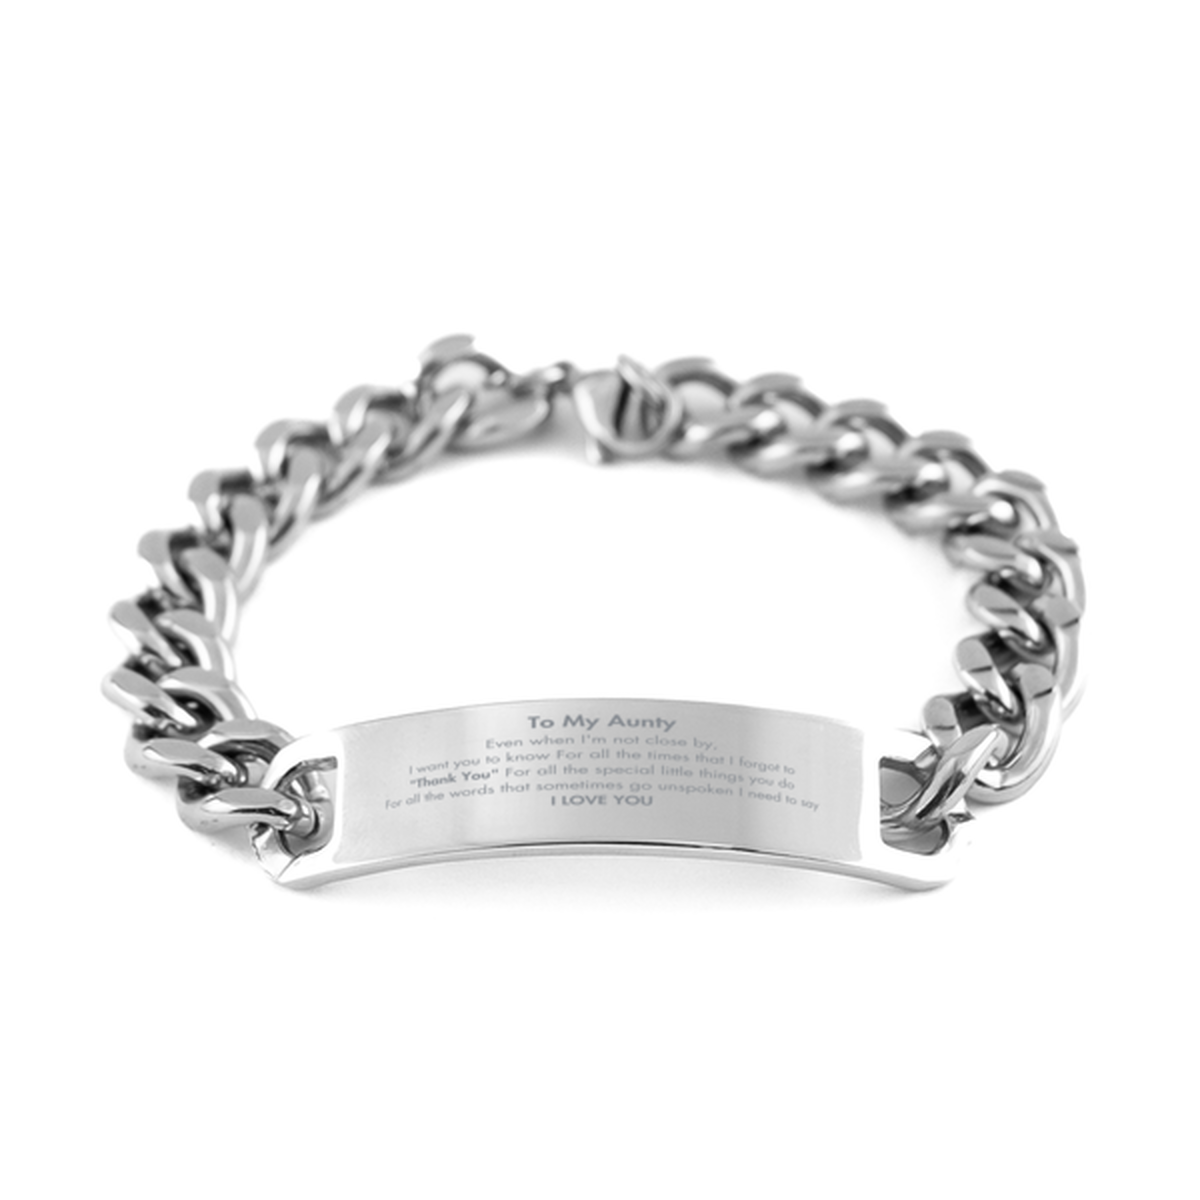 Thank You Gifts for Aunty, Keepsake Cuban Chain Stainless Steel Bracelet Gifts for Aunty Birthday Mother's day Father's Day Aunty For all the words That sometimes go unspoken I need to say I LOVE YOU